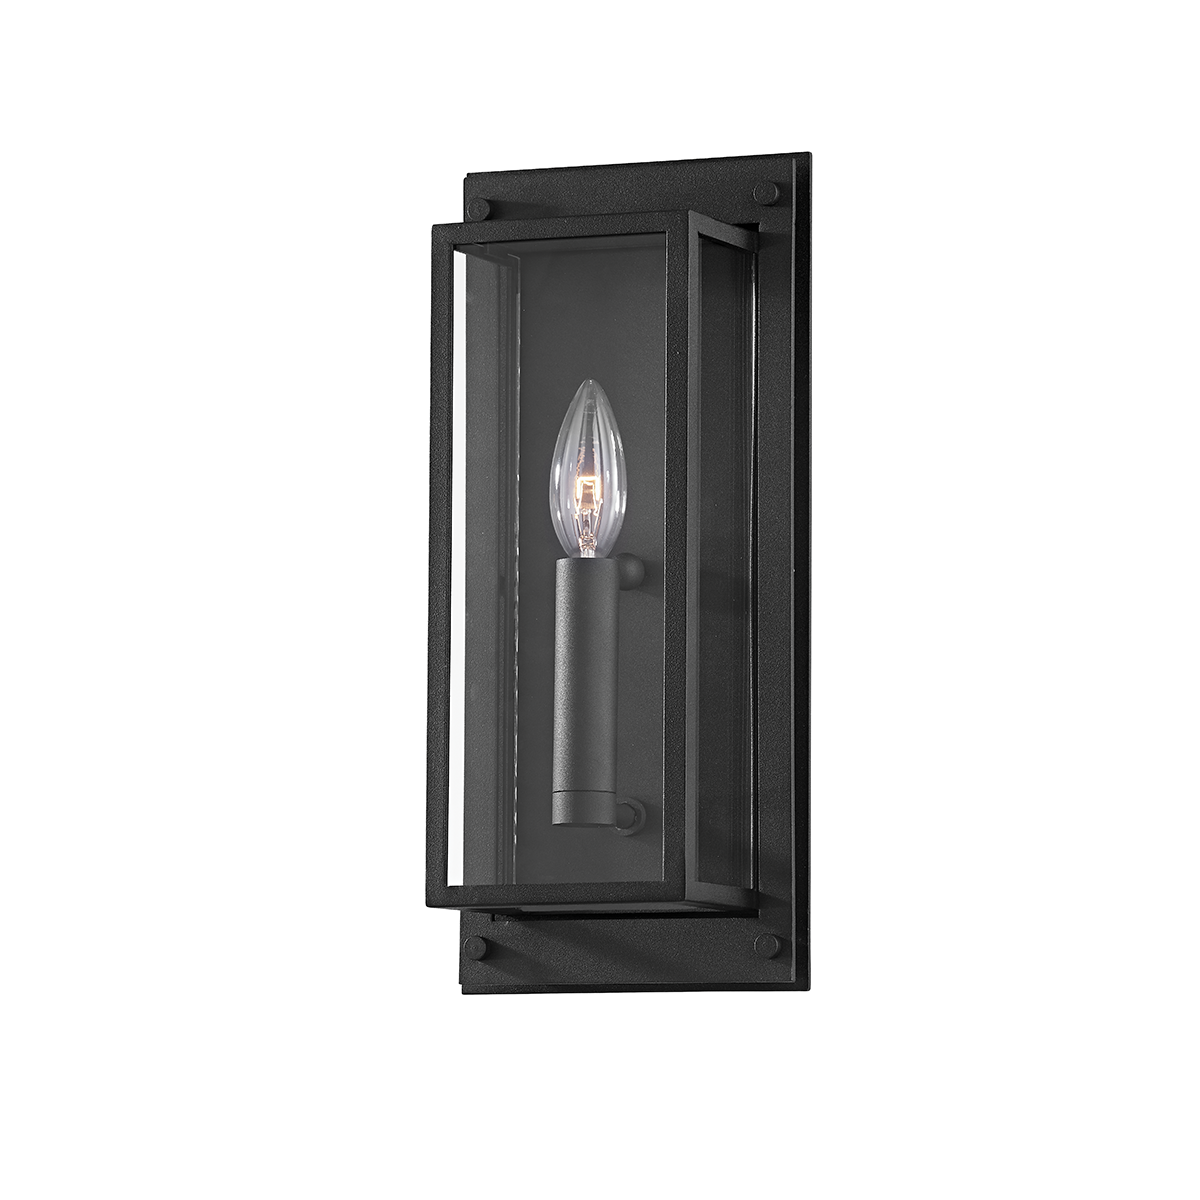 Troy Lighting 1 LIGHT SMALL EXTERIOR WALL SCONCE B9101